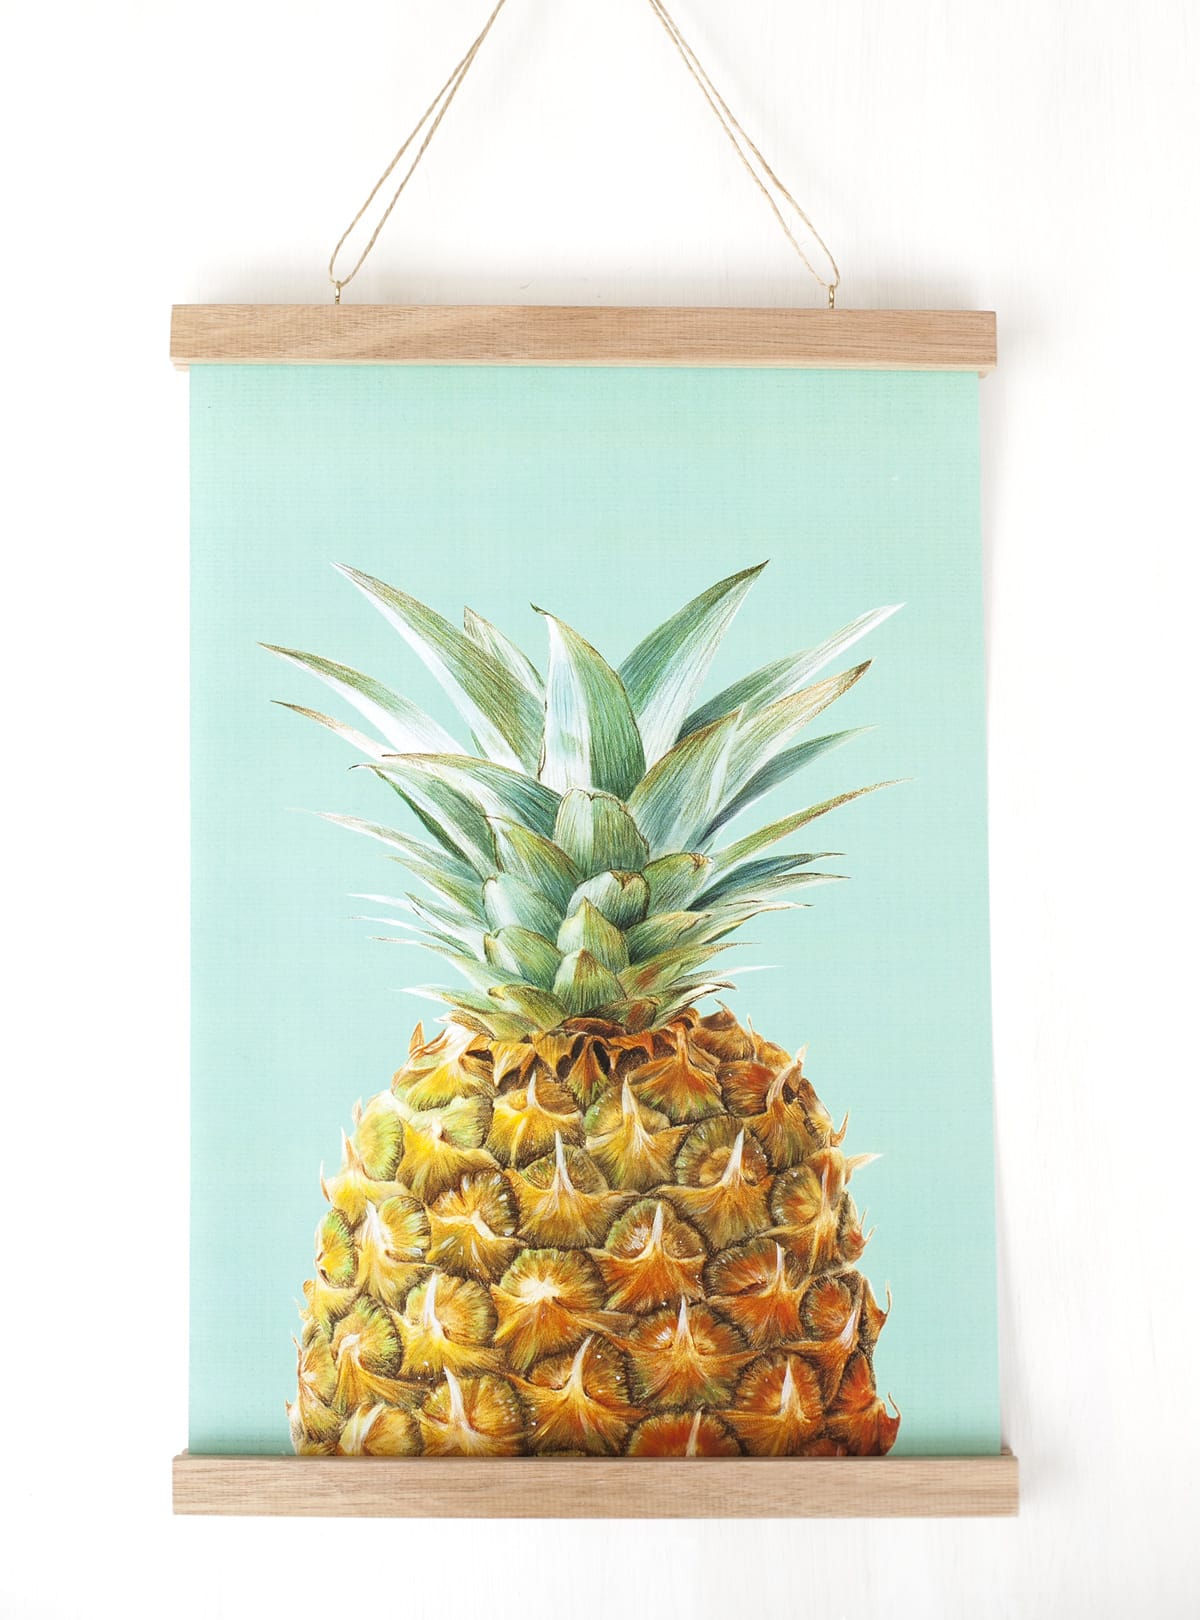 hanger poster and pineapple picture